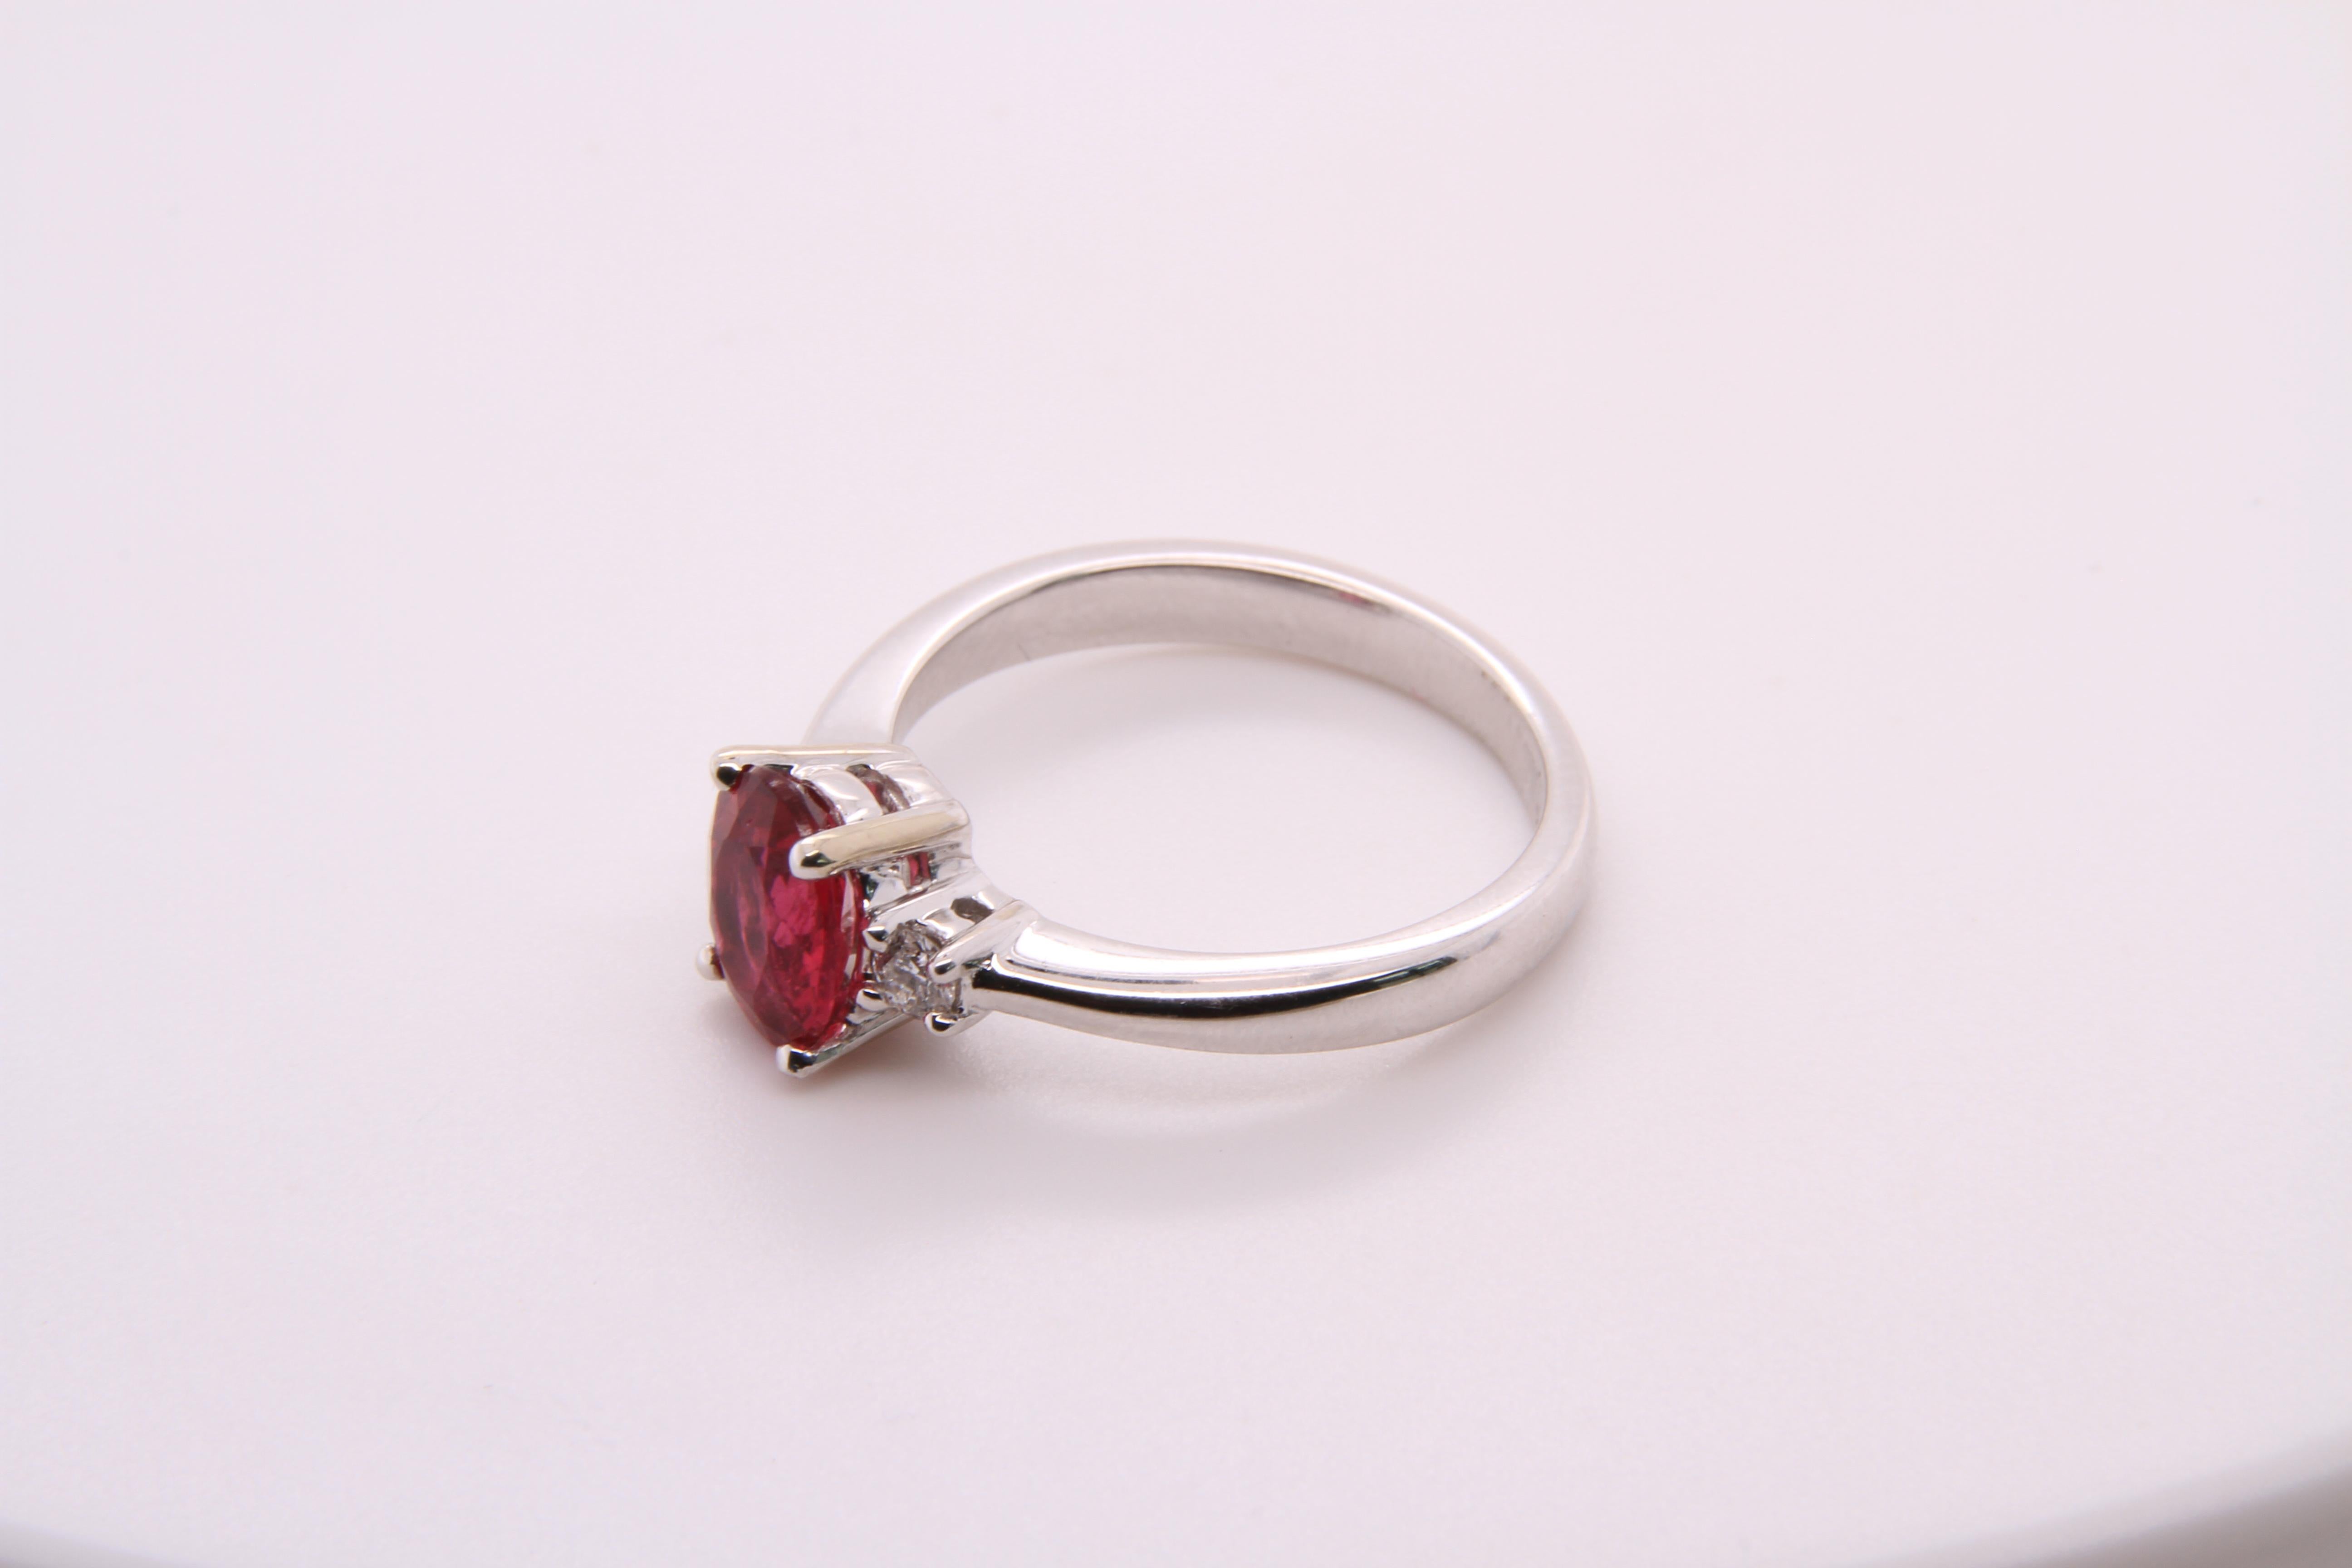 Bright, Pink, Oval Tourmaline Engagement Ring with Diamonds, 14K White Gold 6